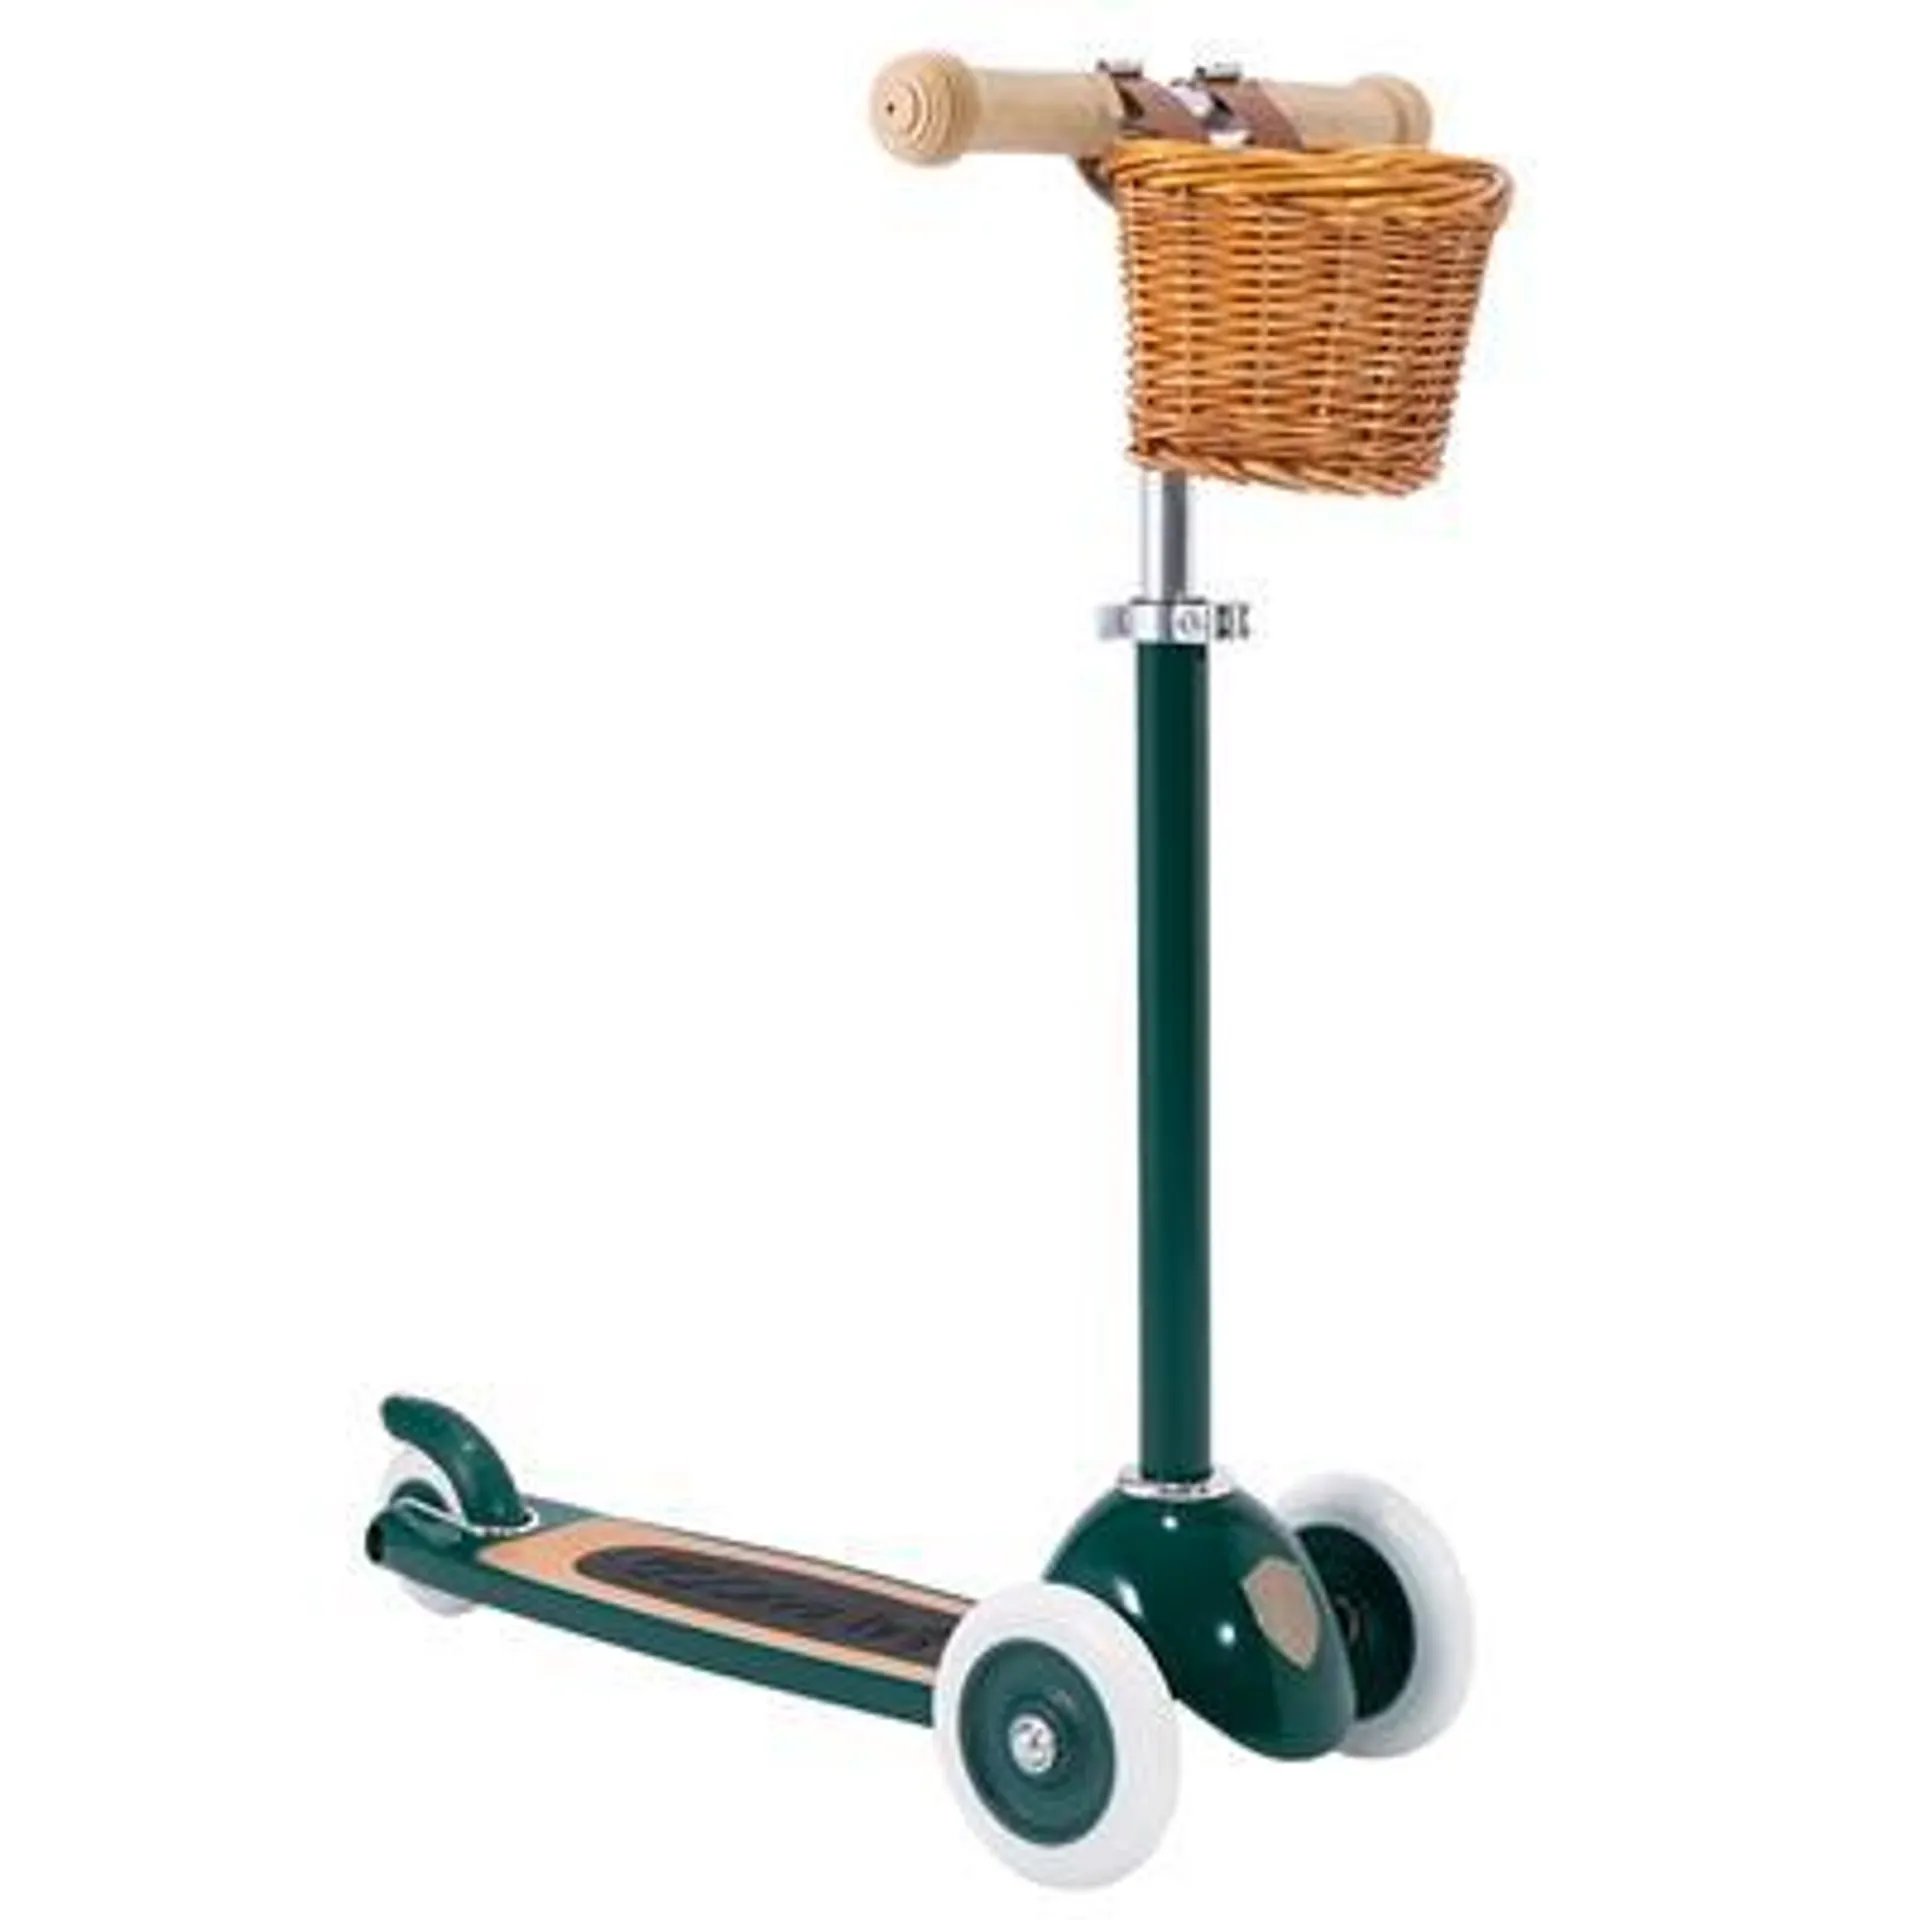 Banwood Step scooter - green